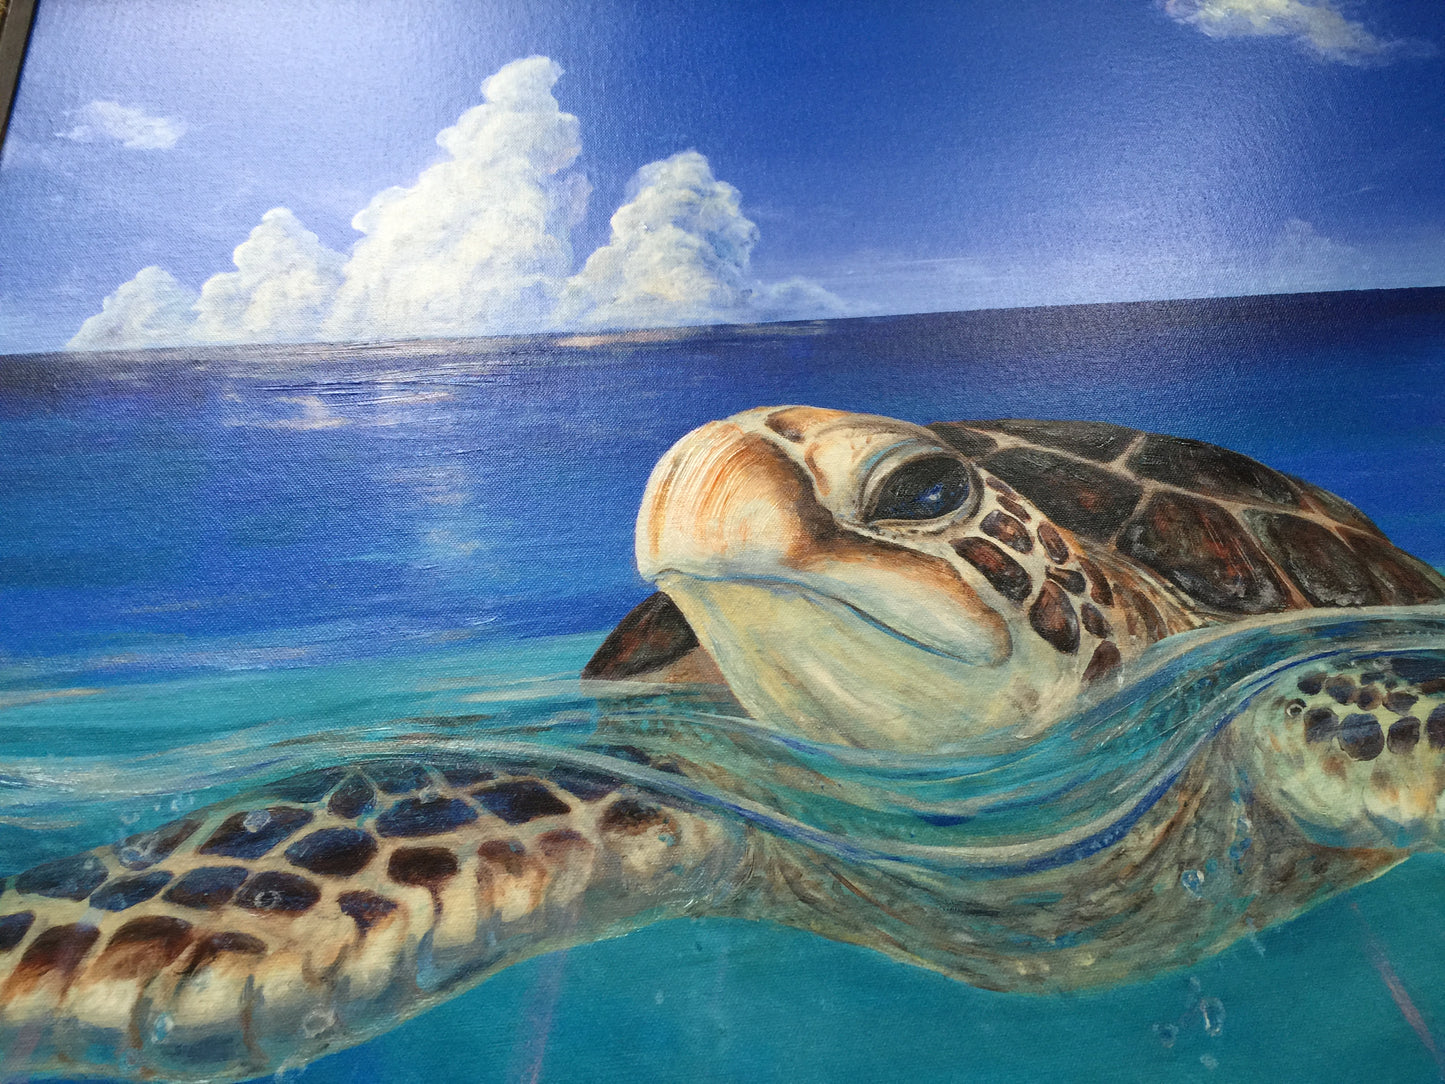 A Peace of the Tropics - Tropical Sea Turtle Art - Large Original Oil Painting - Tropical Hawaiian Ocean Art by Christie Marie E Russell ©